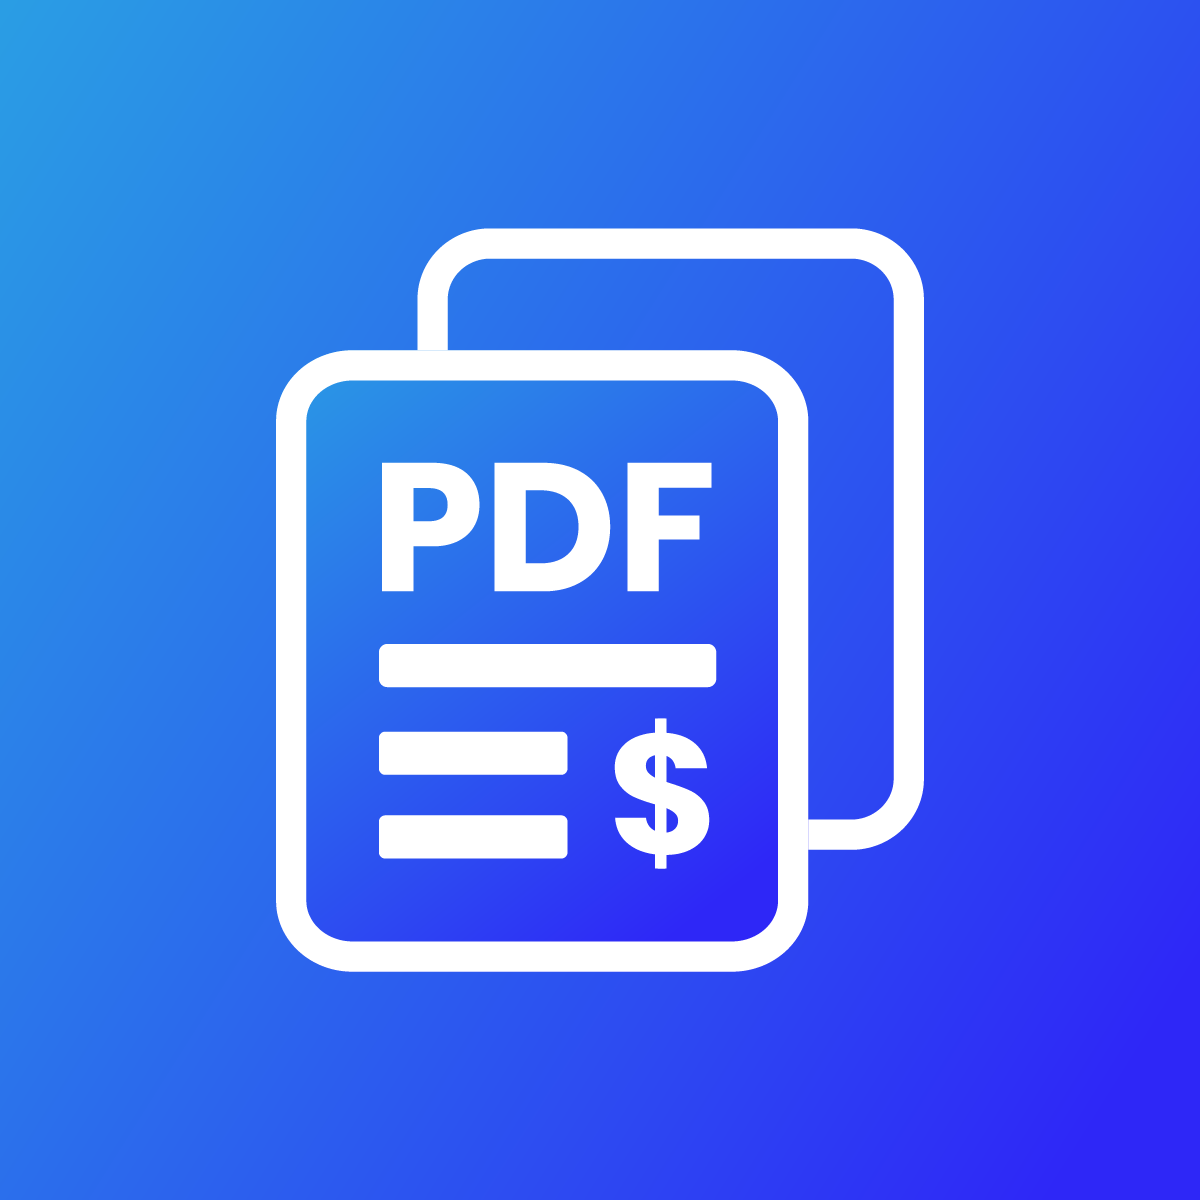 Hire Shopify Experts to integrate Drag & Drop PDF Invoice app into a Shopify store